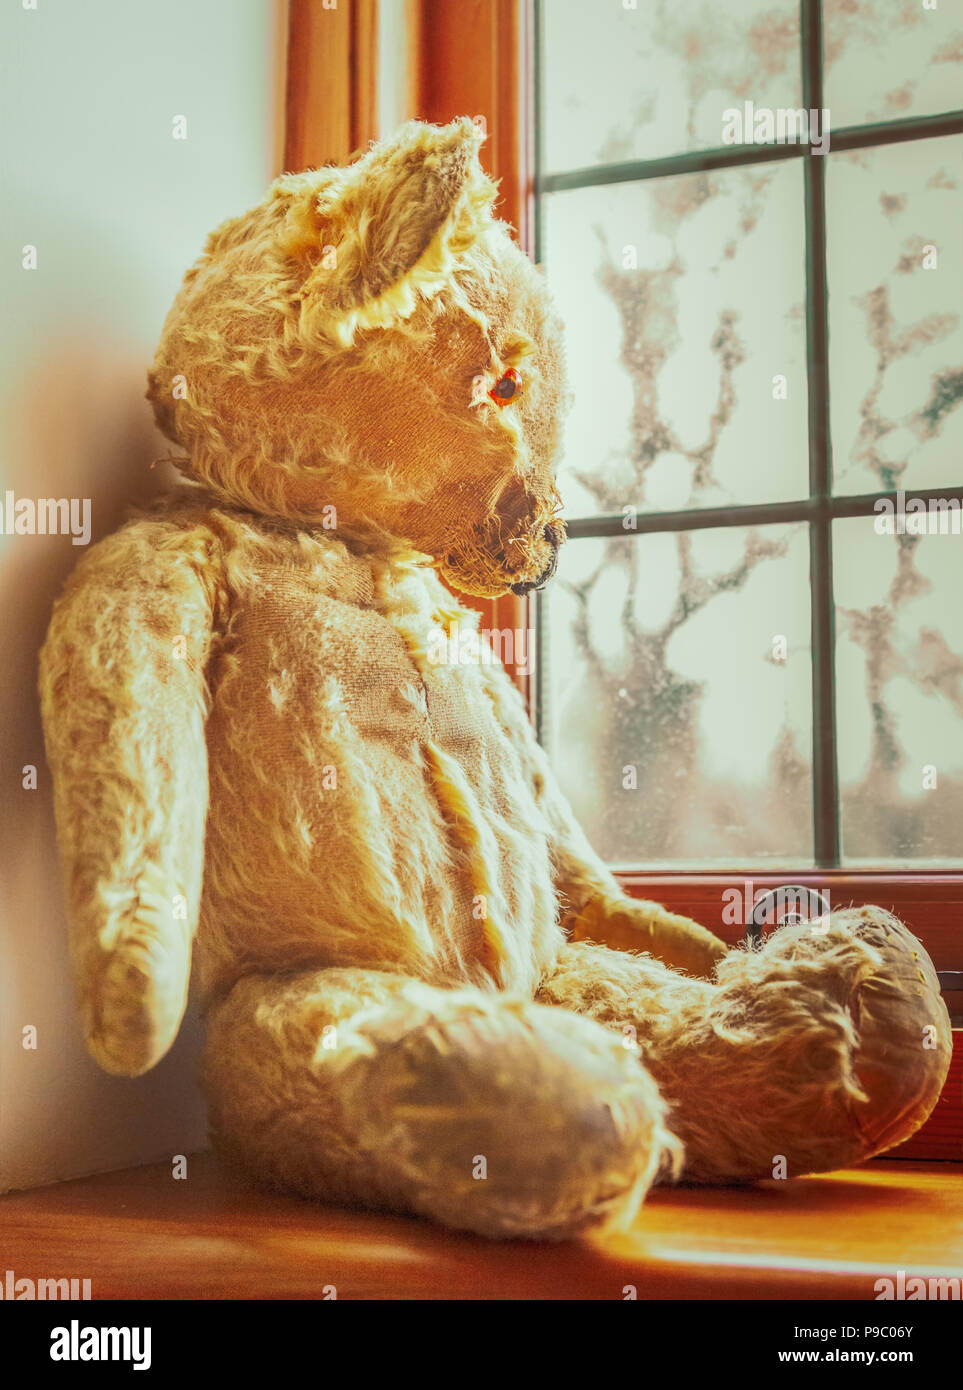 vintage worn out golden brown teddy bear sitting on a window sill looking out of a lead lined window Stock Photo